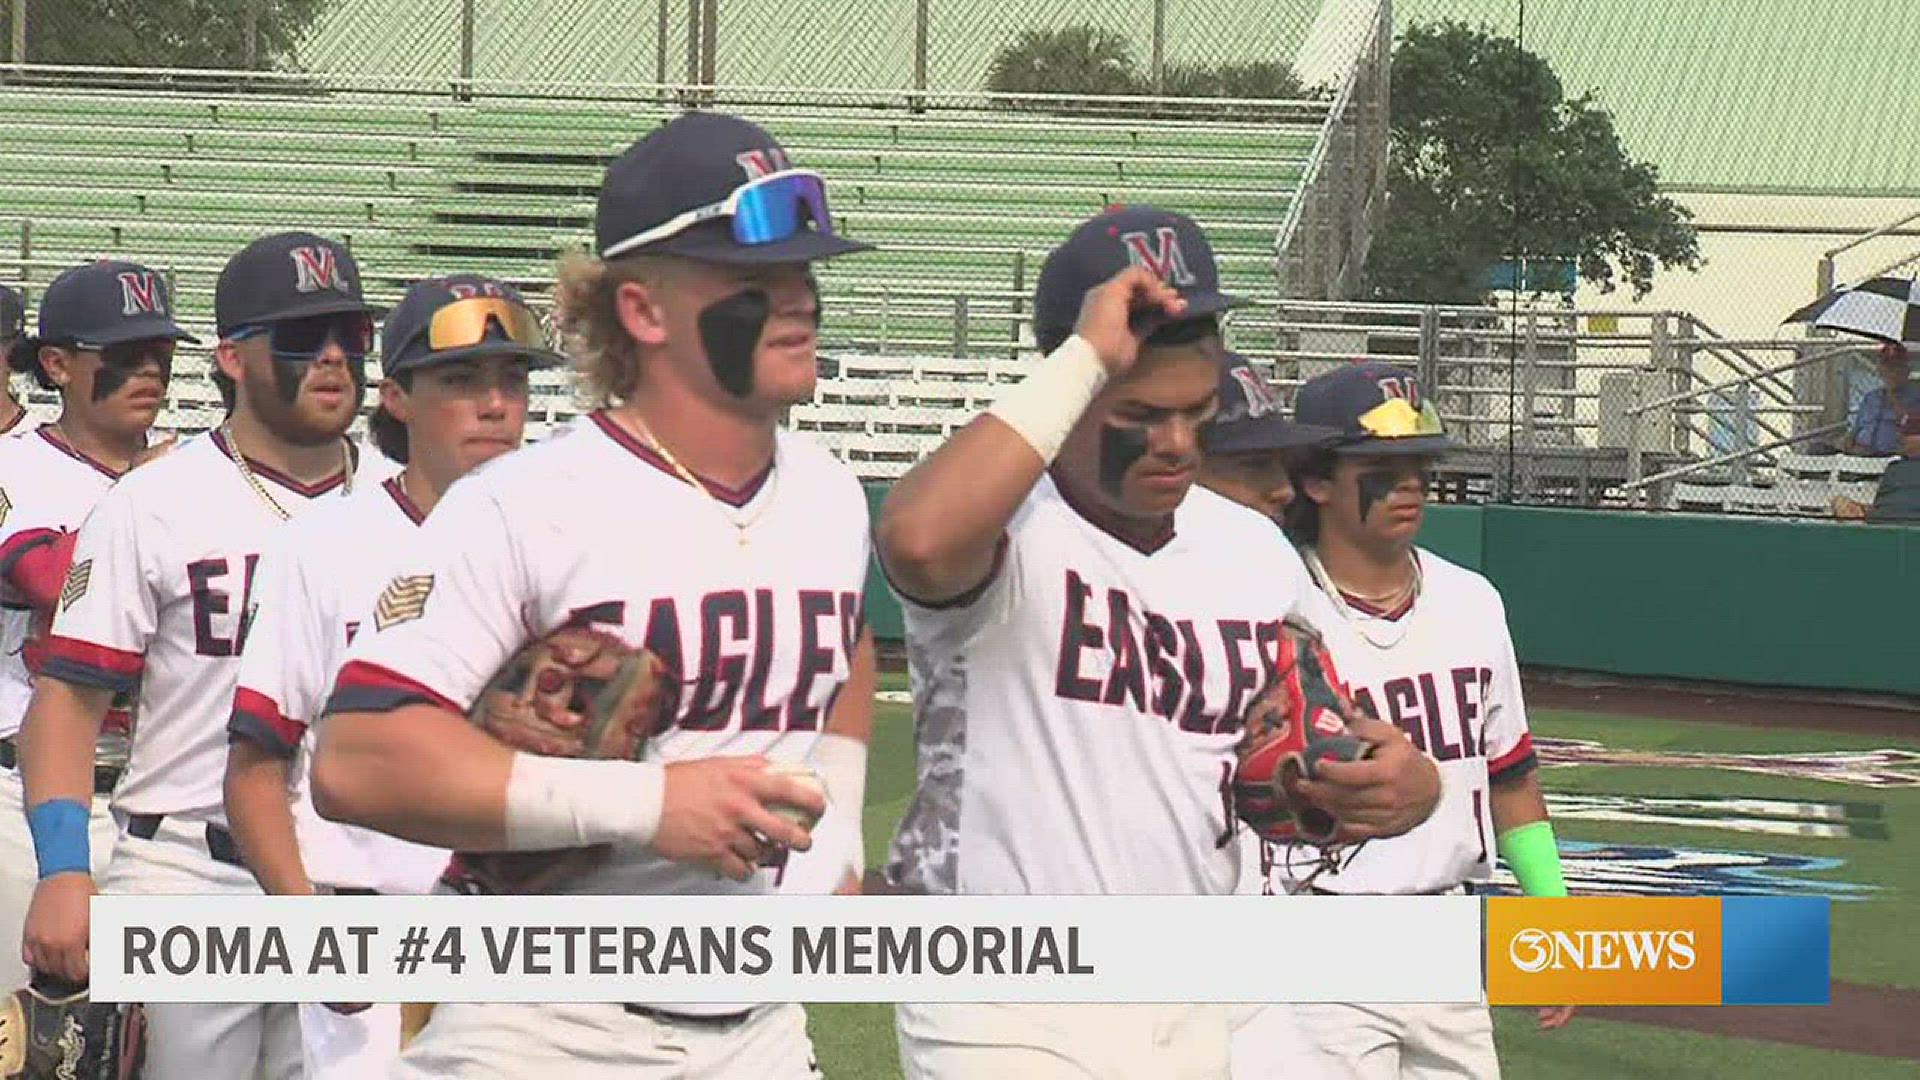 Veterans Memorial run rules Roma in G1. Taft rallies in final inning to eliminate Hebbronville in one-game playoff.